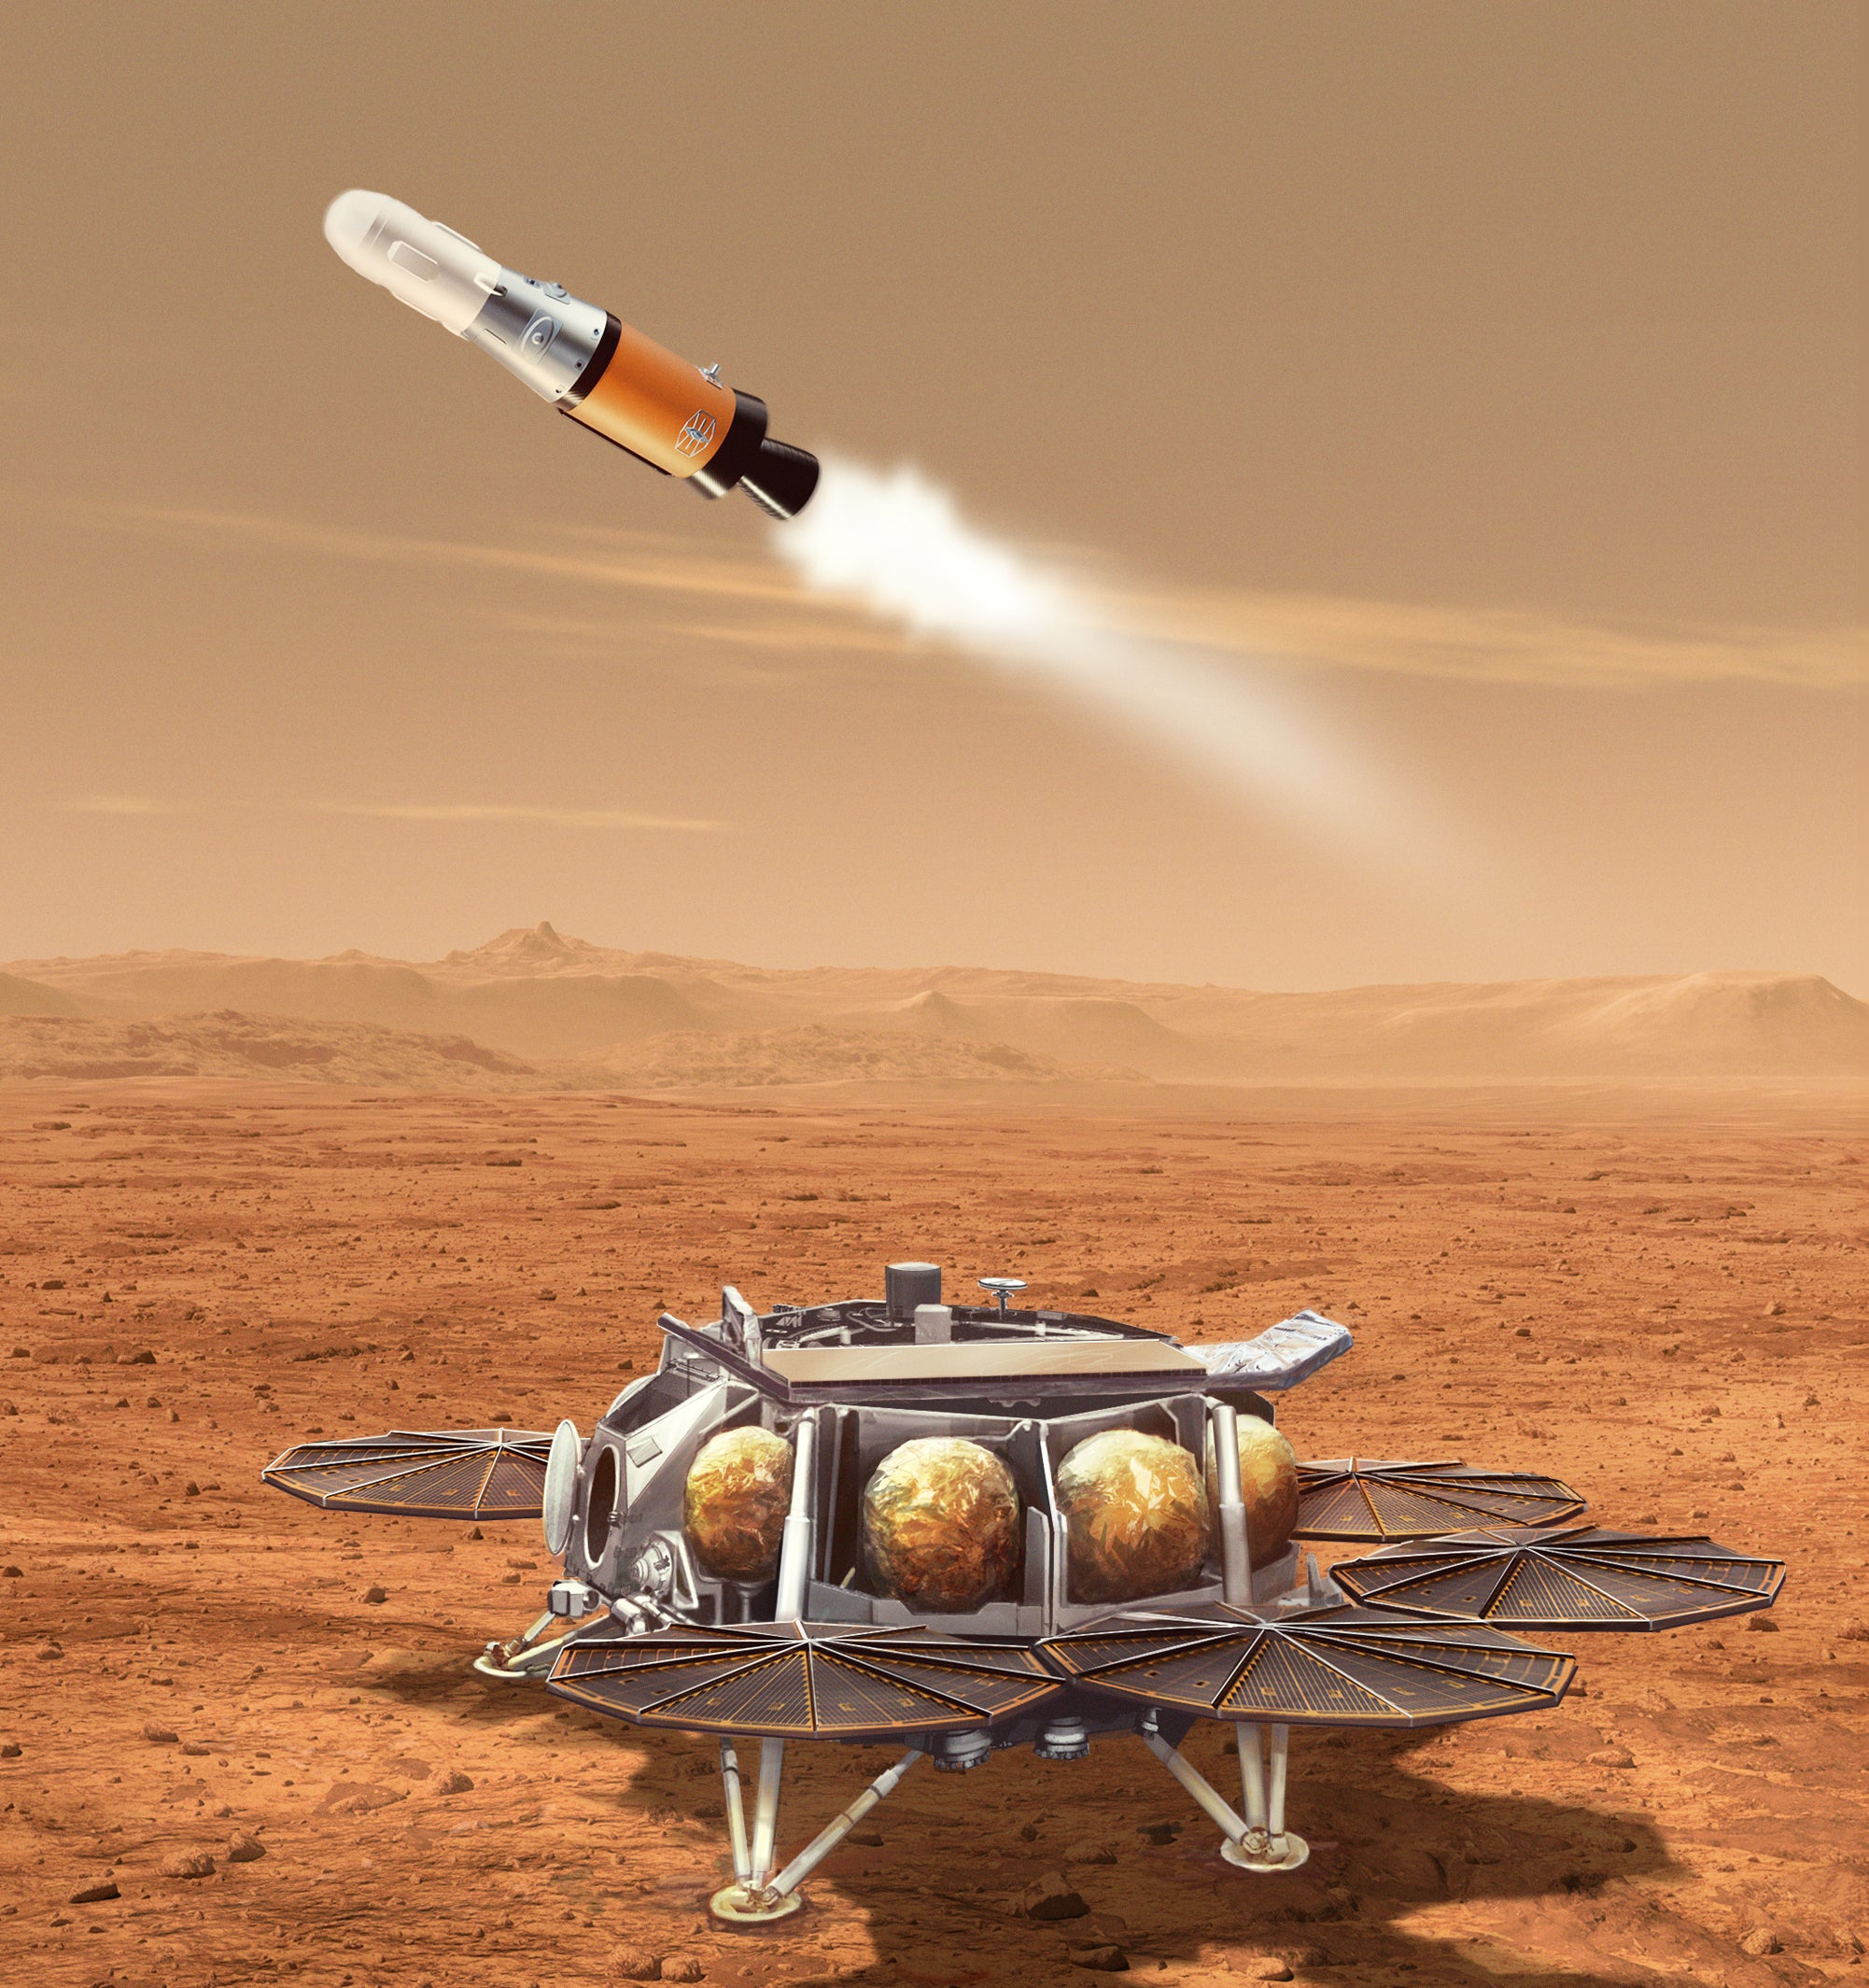 This illustration shows a concept for a proposed NASA Mars lander-and-rocket combination that would play a key role in returning to Earth samples of Mars material collected by the Perseverance rover. This Sample Retrieval Lander would carry a small rocket (about 10 feet, or 3 meters, tall) called the Mars Ascent Vehicle to the Martian surface. After using a robotic arm to load the rover’s sealed sample tubes into a container in the nose cone of the rocket, the lander would launch the Mars Ascent Vehicle into orbit around the Red Planet. The lander and rocket are part of the multimission Mars Sample Return program being planned by NASA and ESA (European Space Agency). The program would use multiple robotic vehicles to pick up and ferry sealed tubes containing Mars samples already collected by NASA's Perseverance rover, for transport to laboratories on Earth.